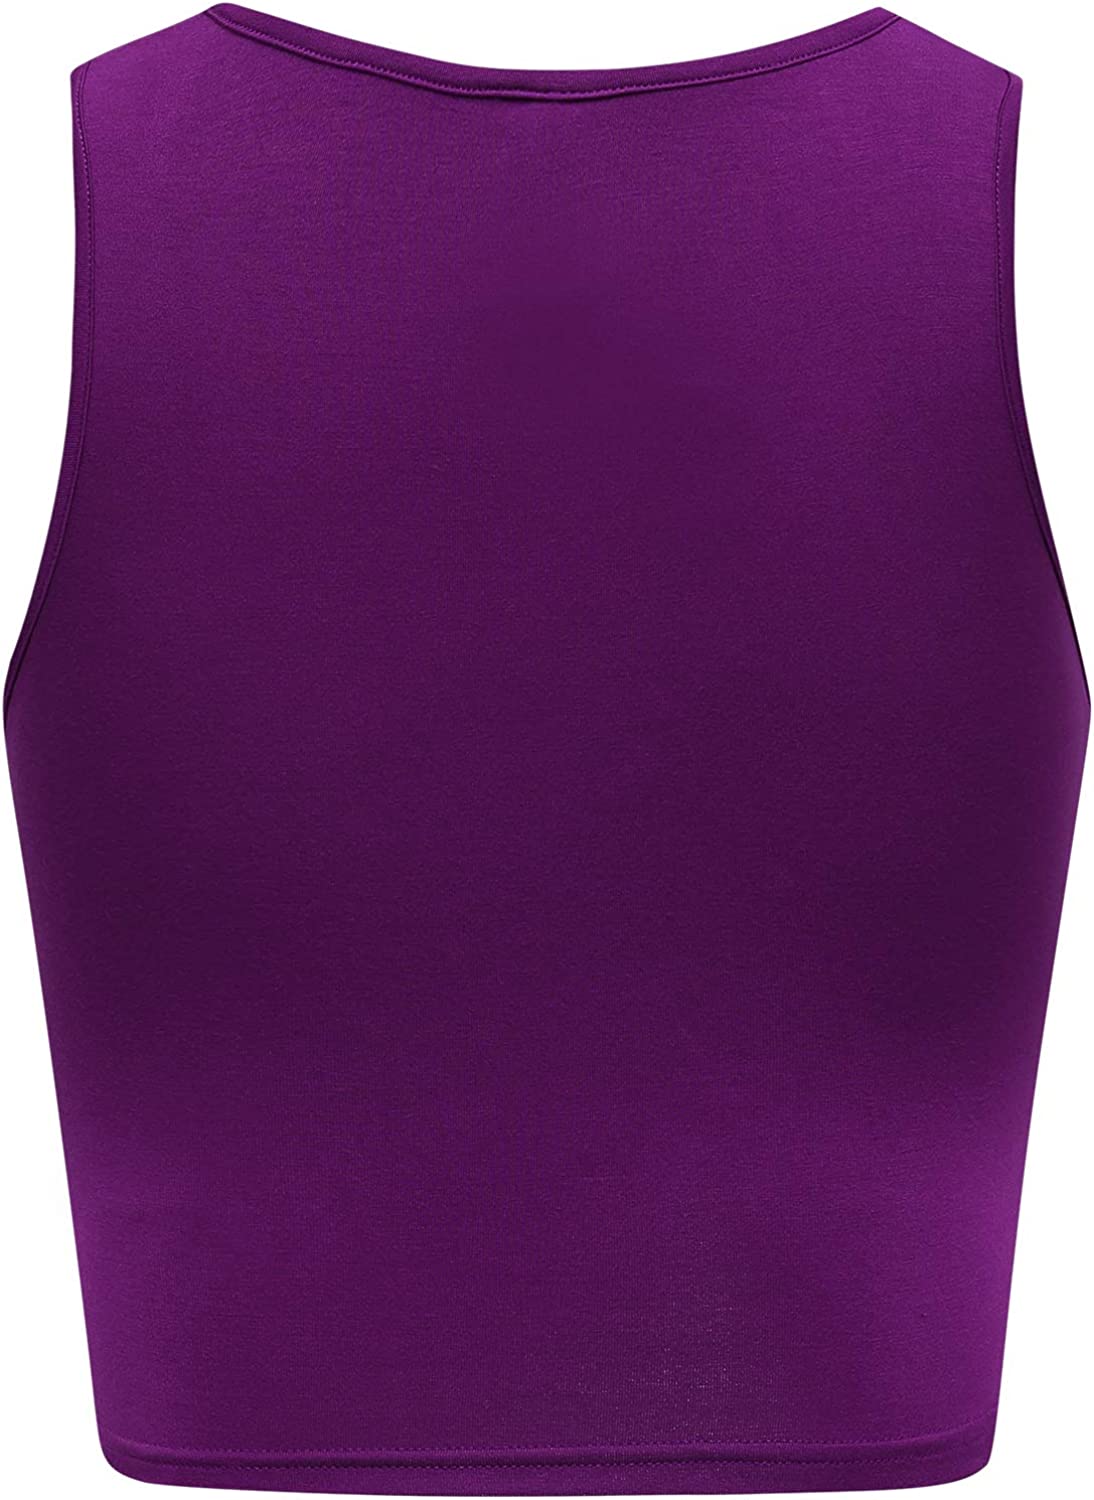 OThread & Co. Women's Basic Crop Tops Stretchy Casual Scoop Neck Sleeveless Crop Tank Top